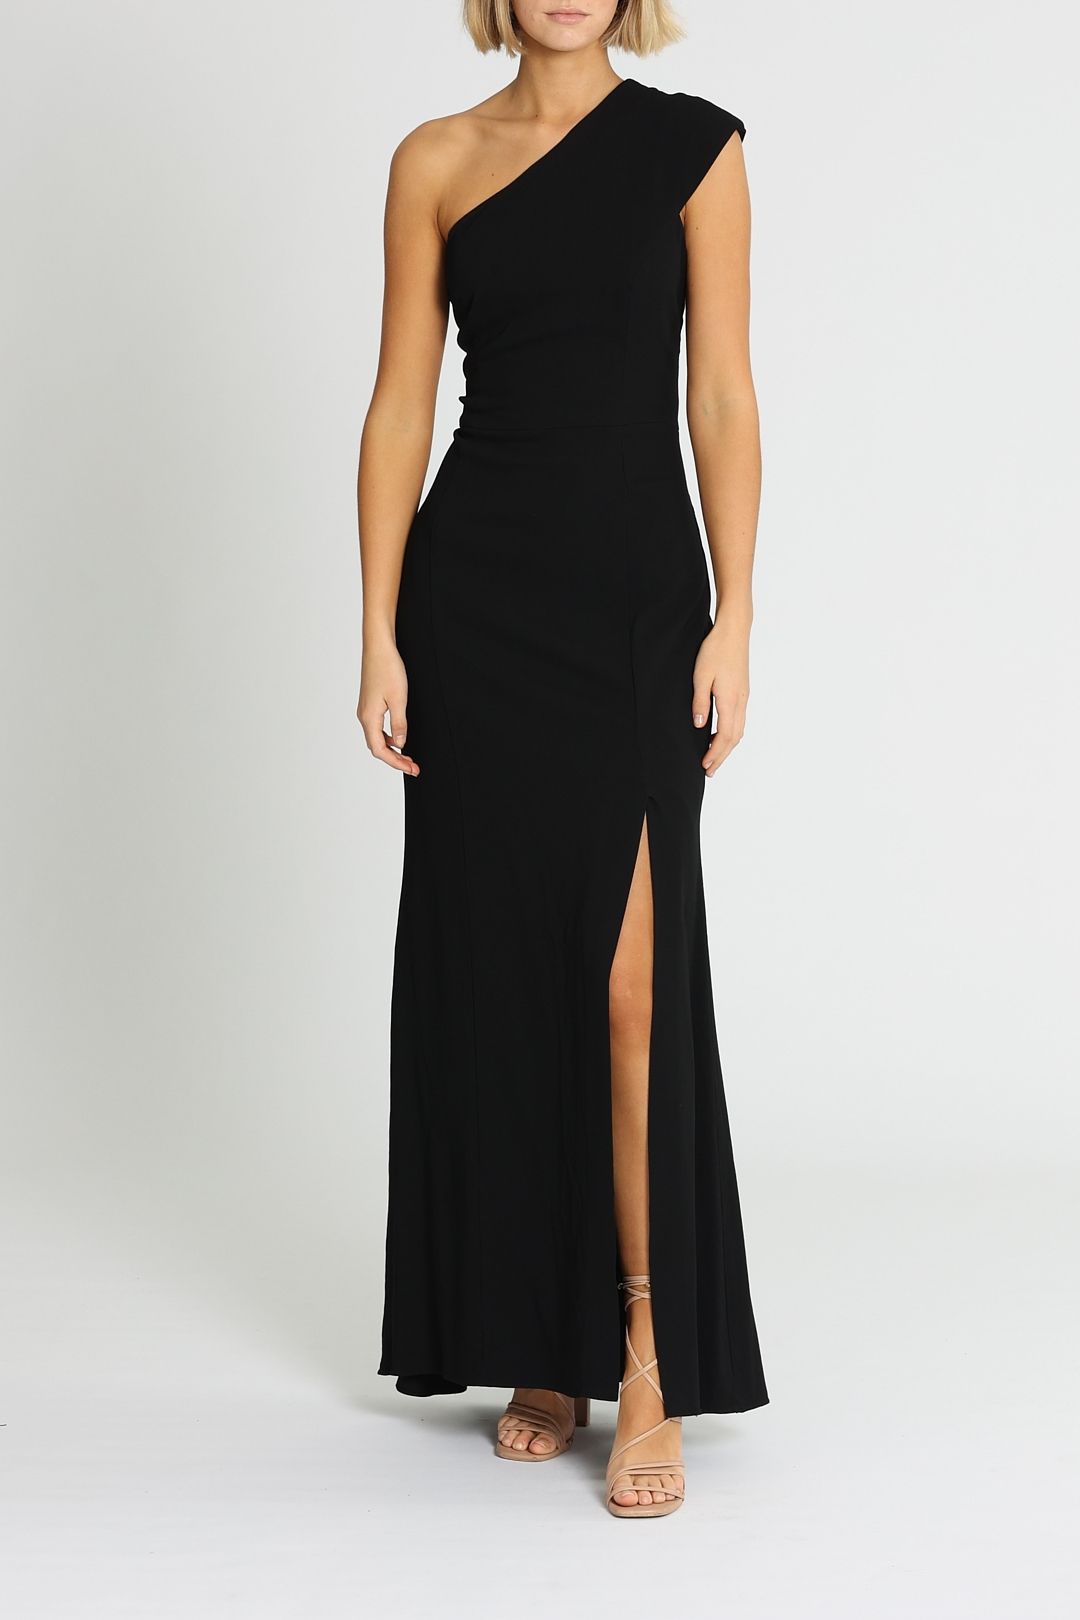 Ginger and Smart Elixer Gown Black